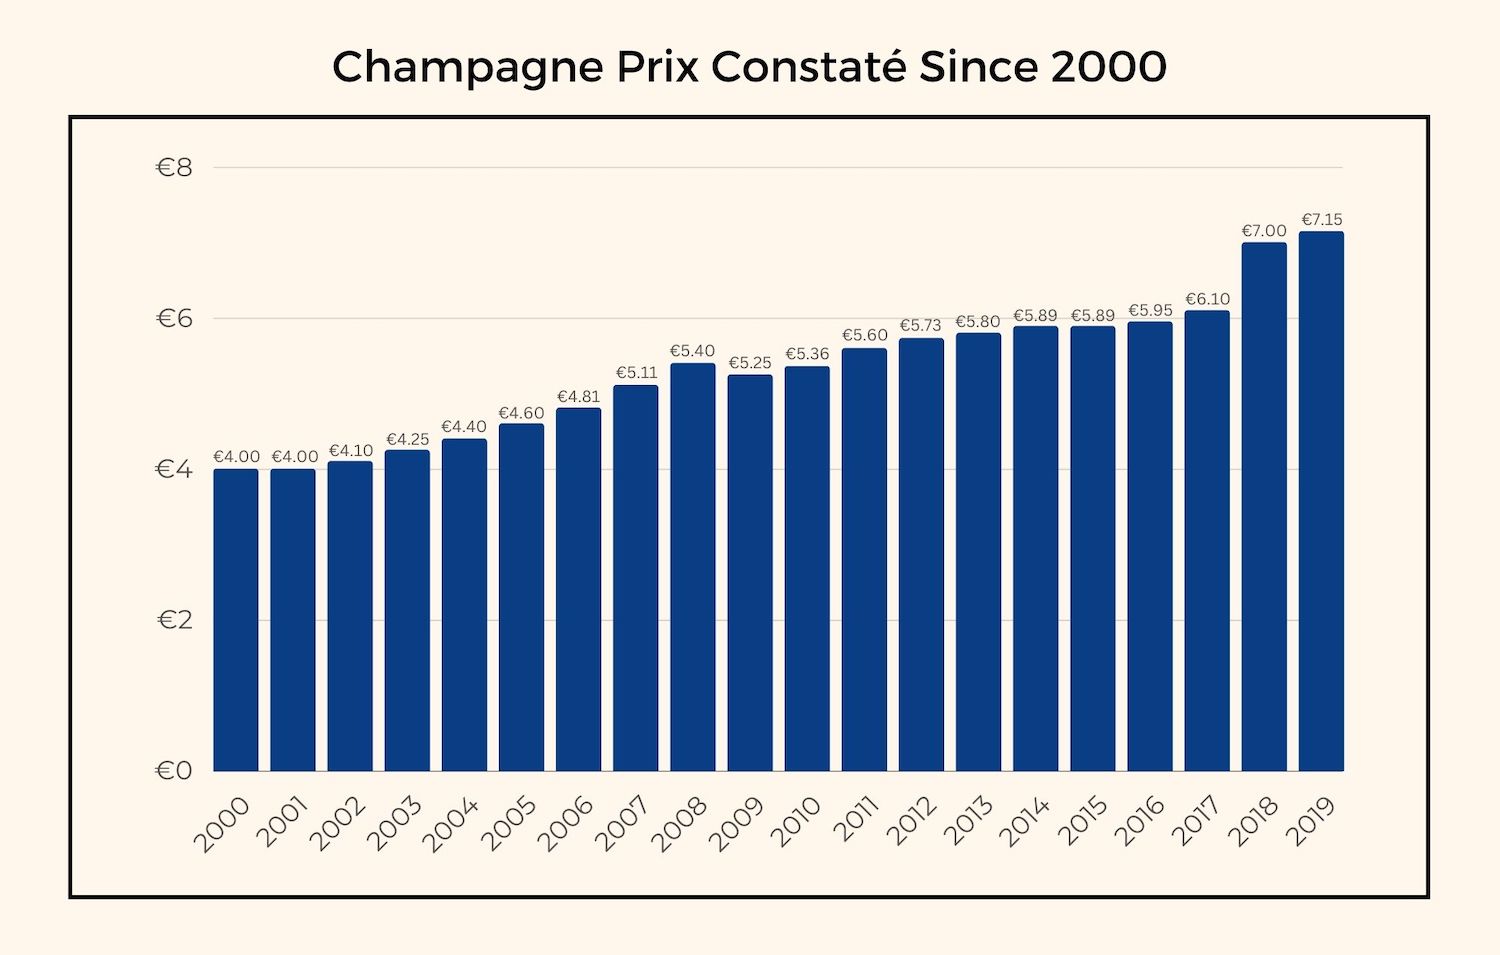 Graph showing the rising prix constaté from 2000 to 2019